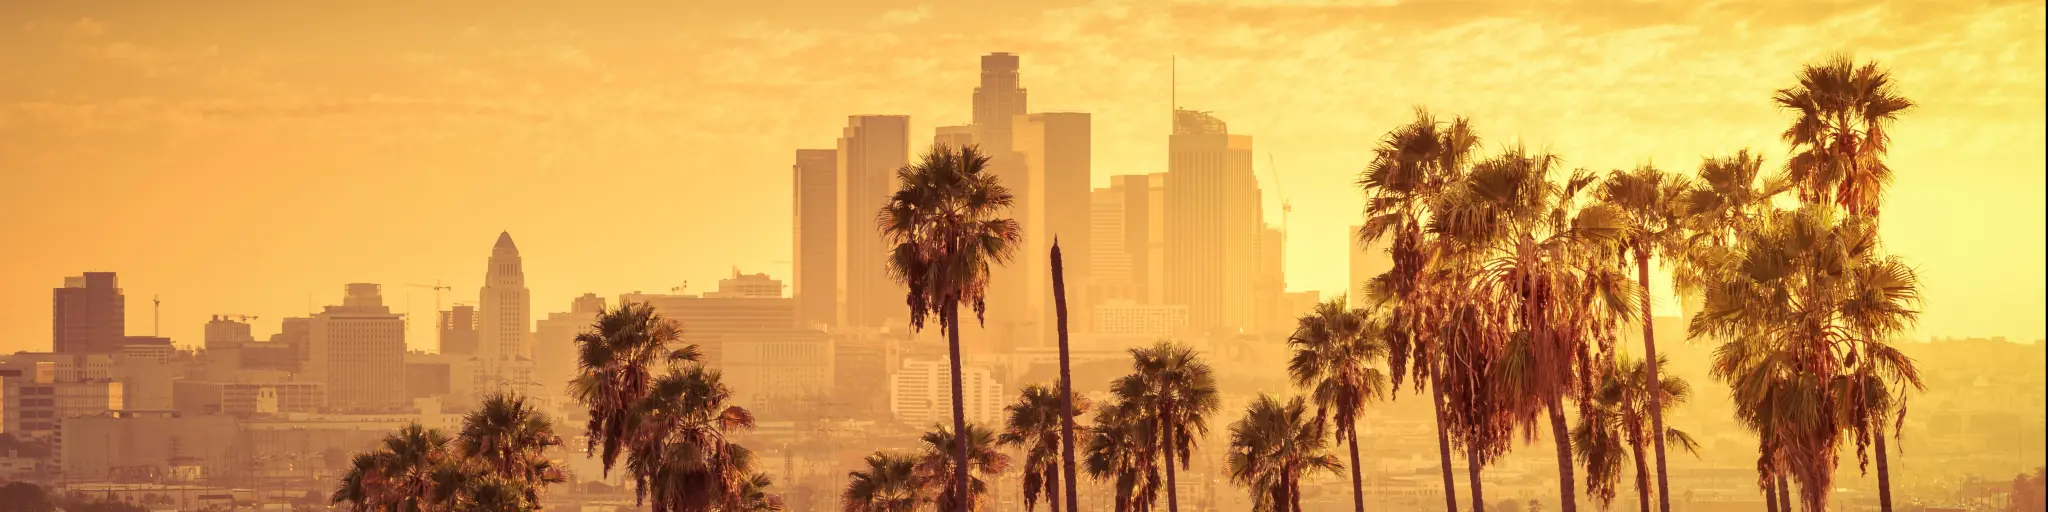 Beautiful sunset of Los Angeles, California, USA downtown skyline and palm trees in foreground.